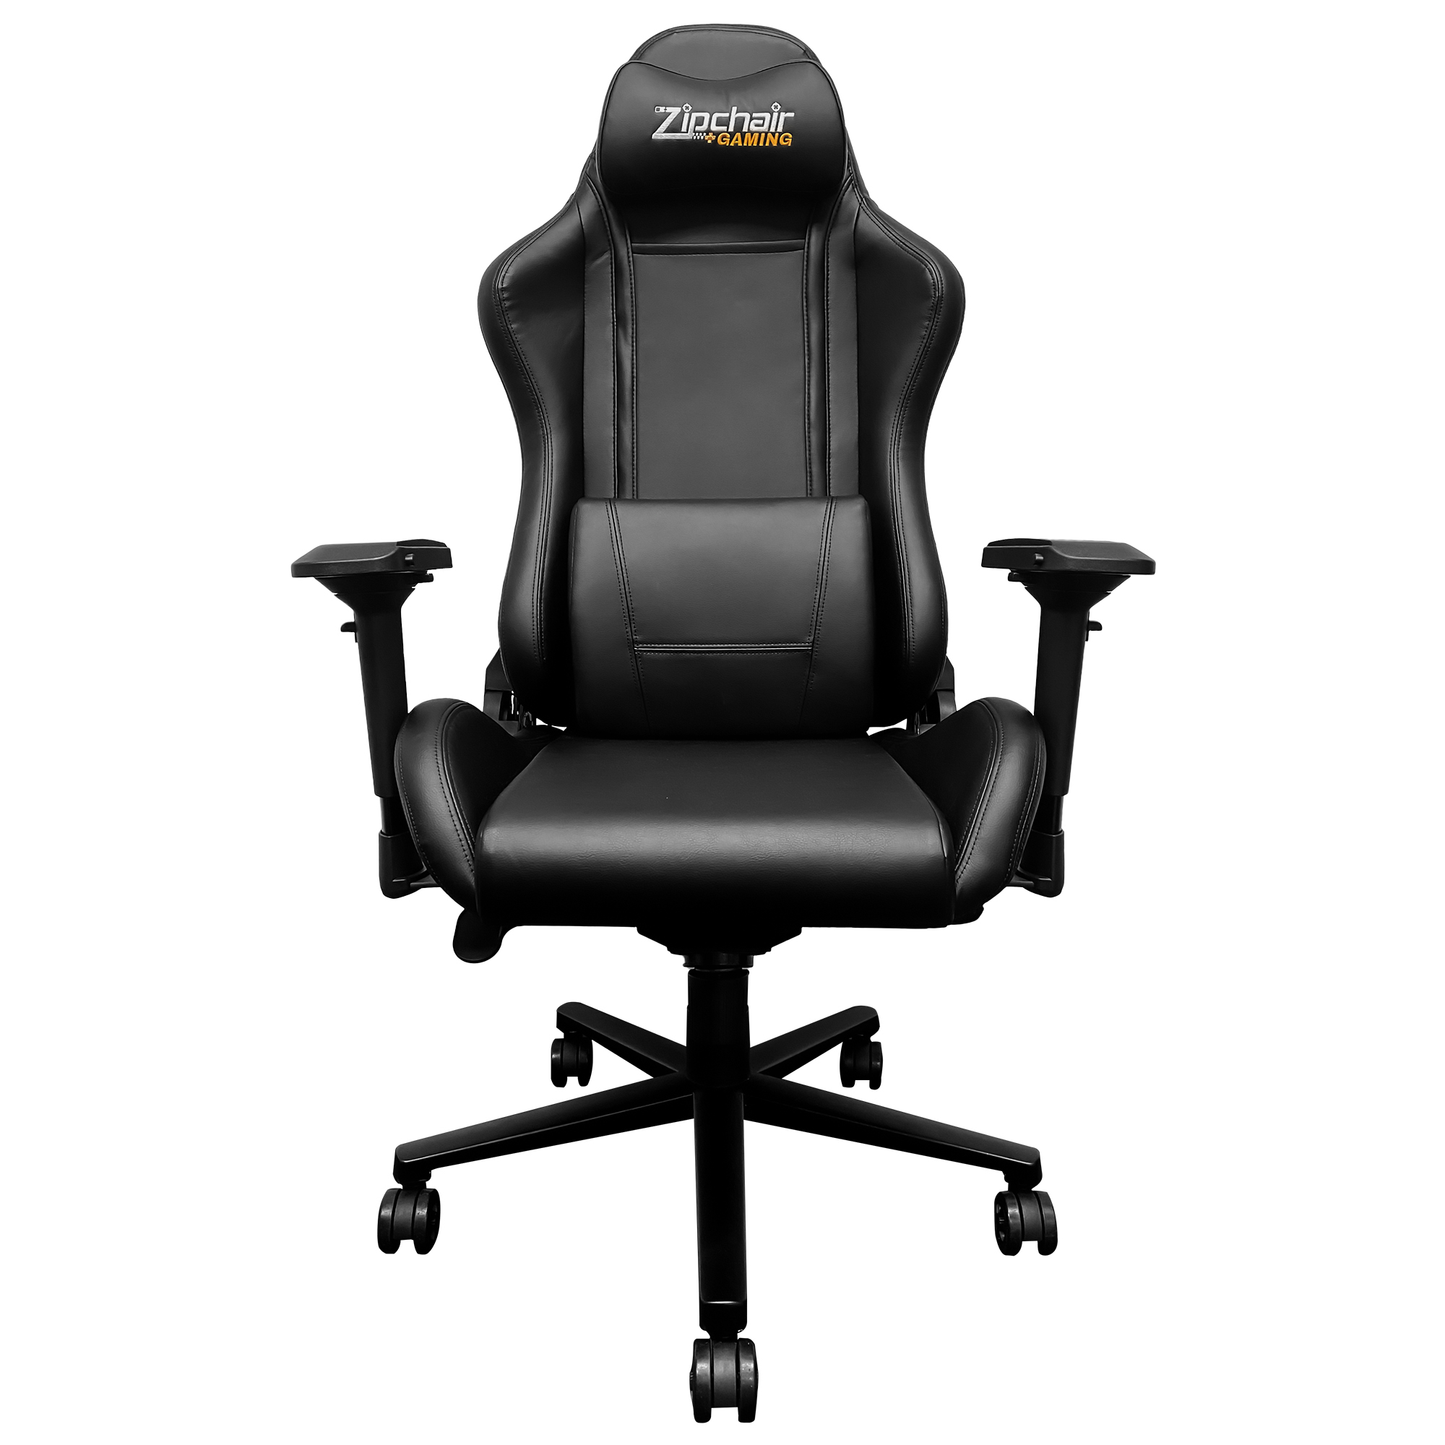 Xpression Pro Gaming Chair with Real Salt Lake Wordmark Logo